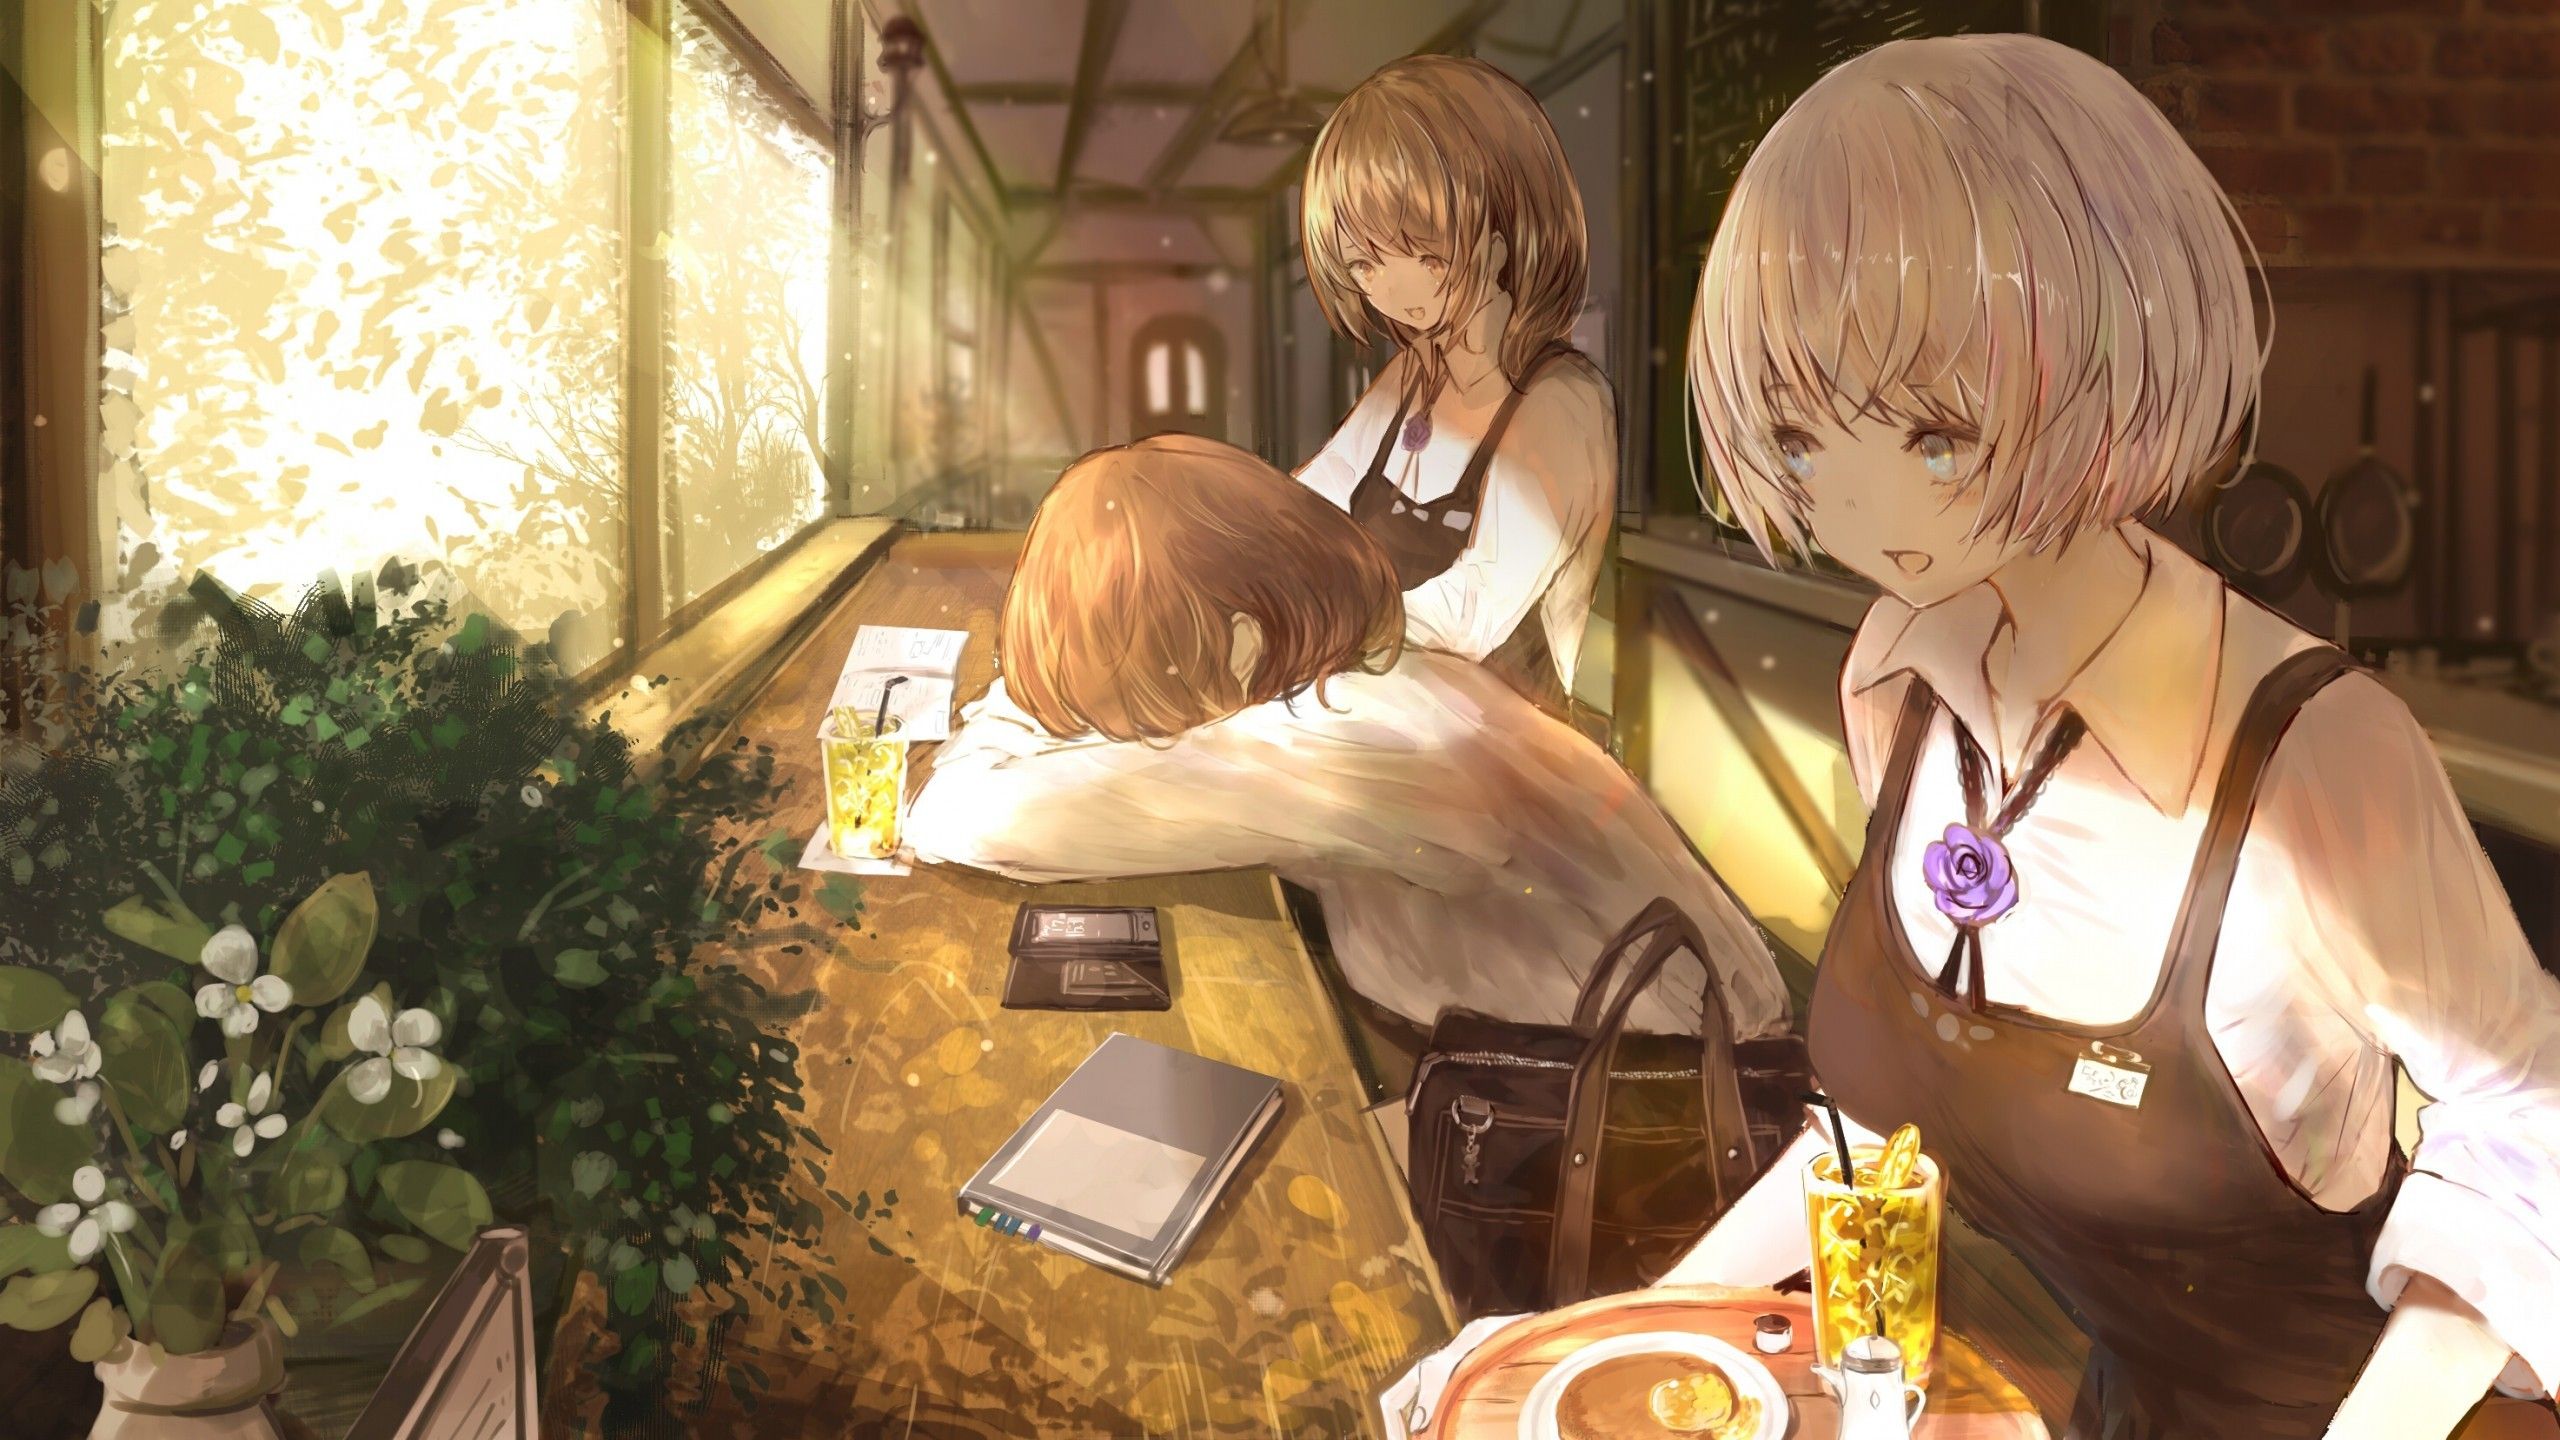 Anime Cafe Wallpapers - Wallpaper Cave